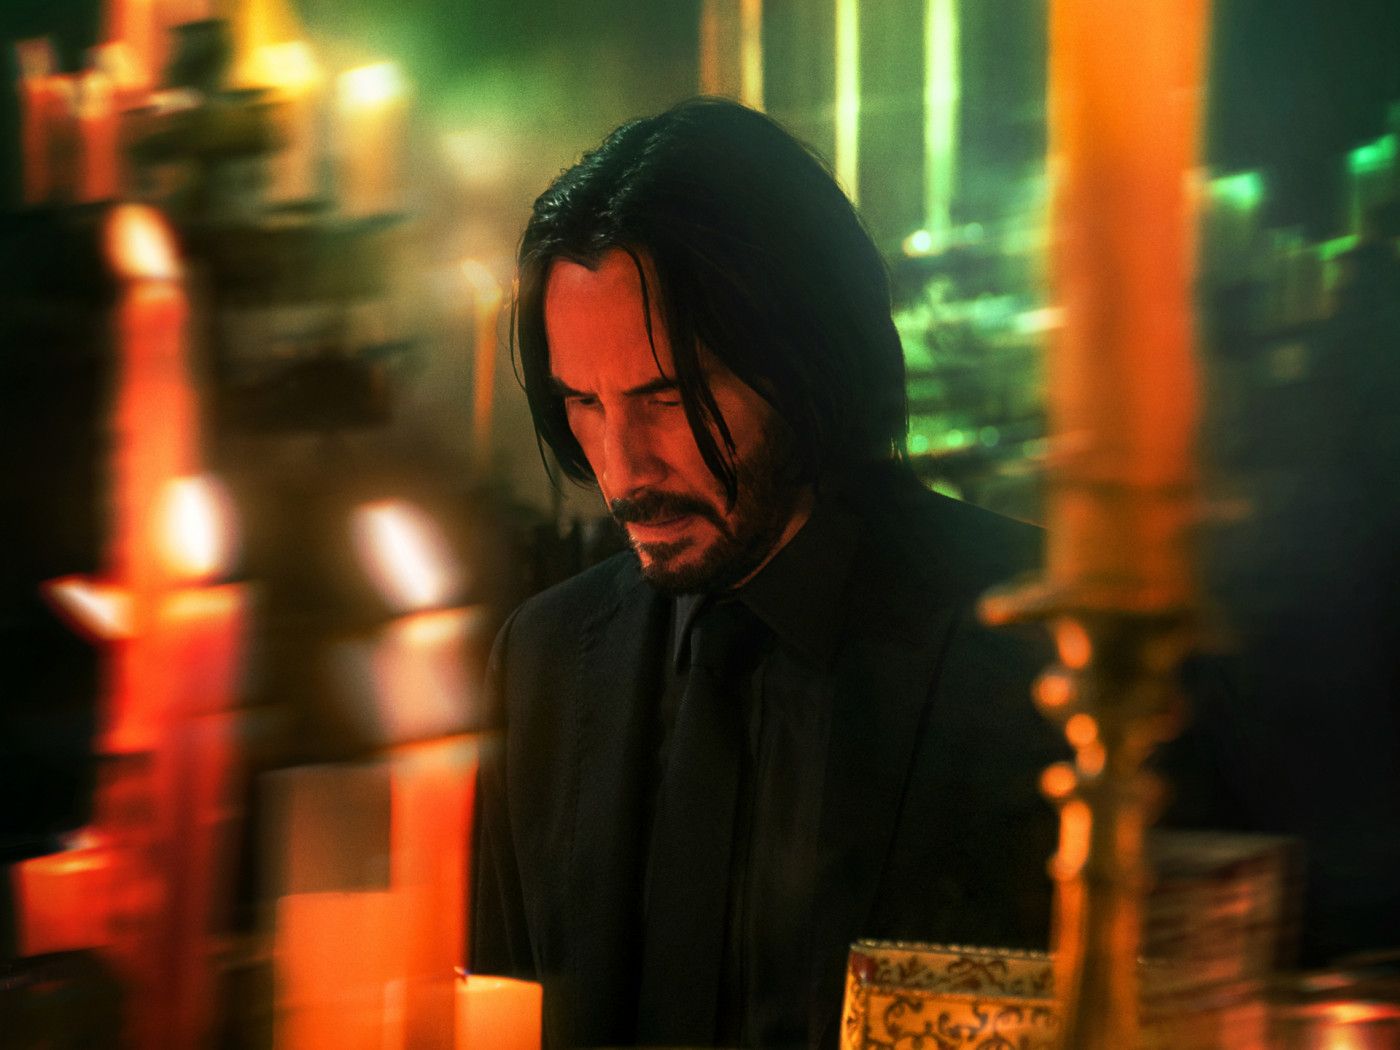 A man with long hair and black suit is standing in front of candles - Sad, dog